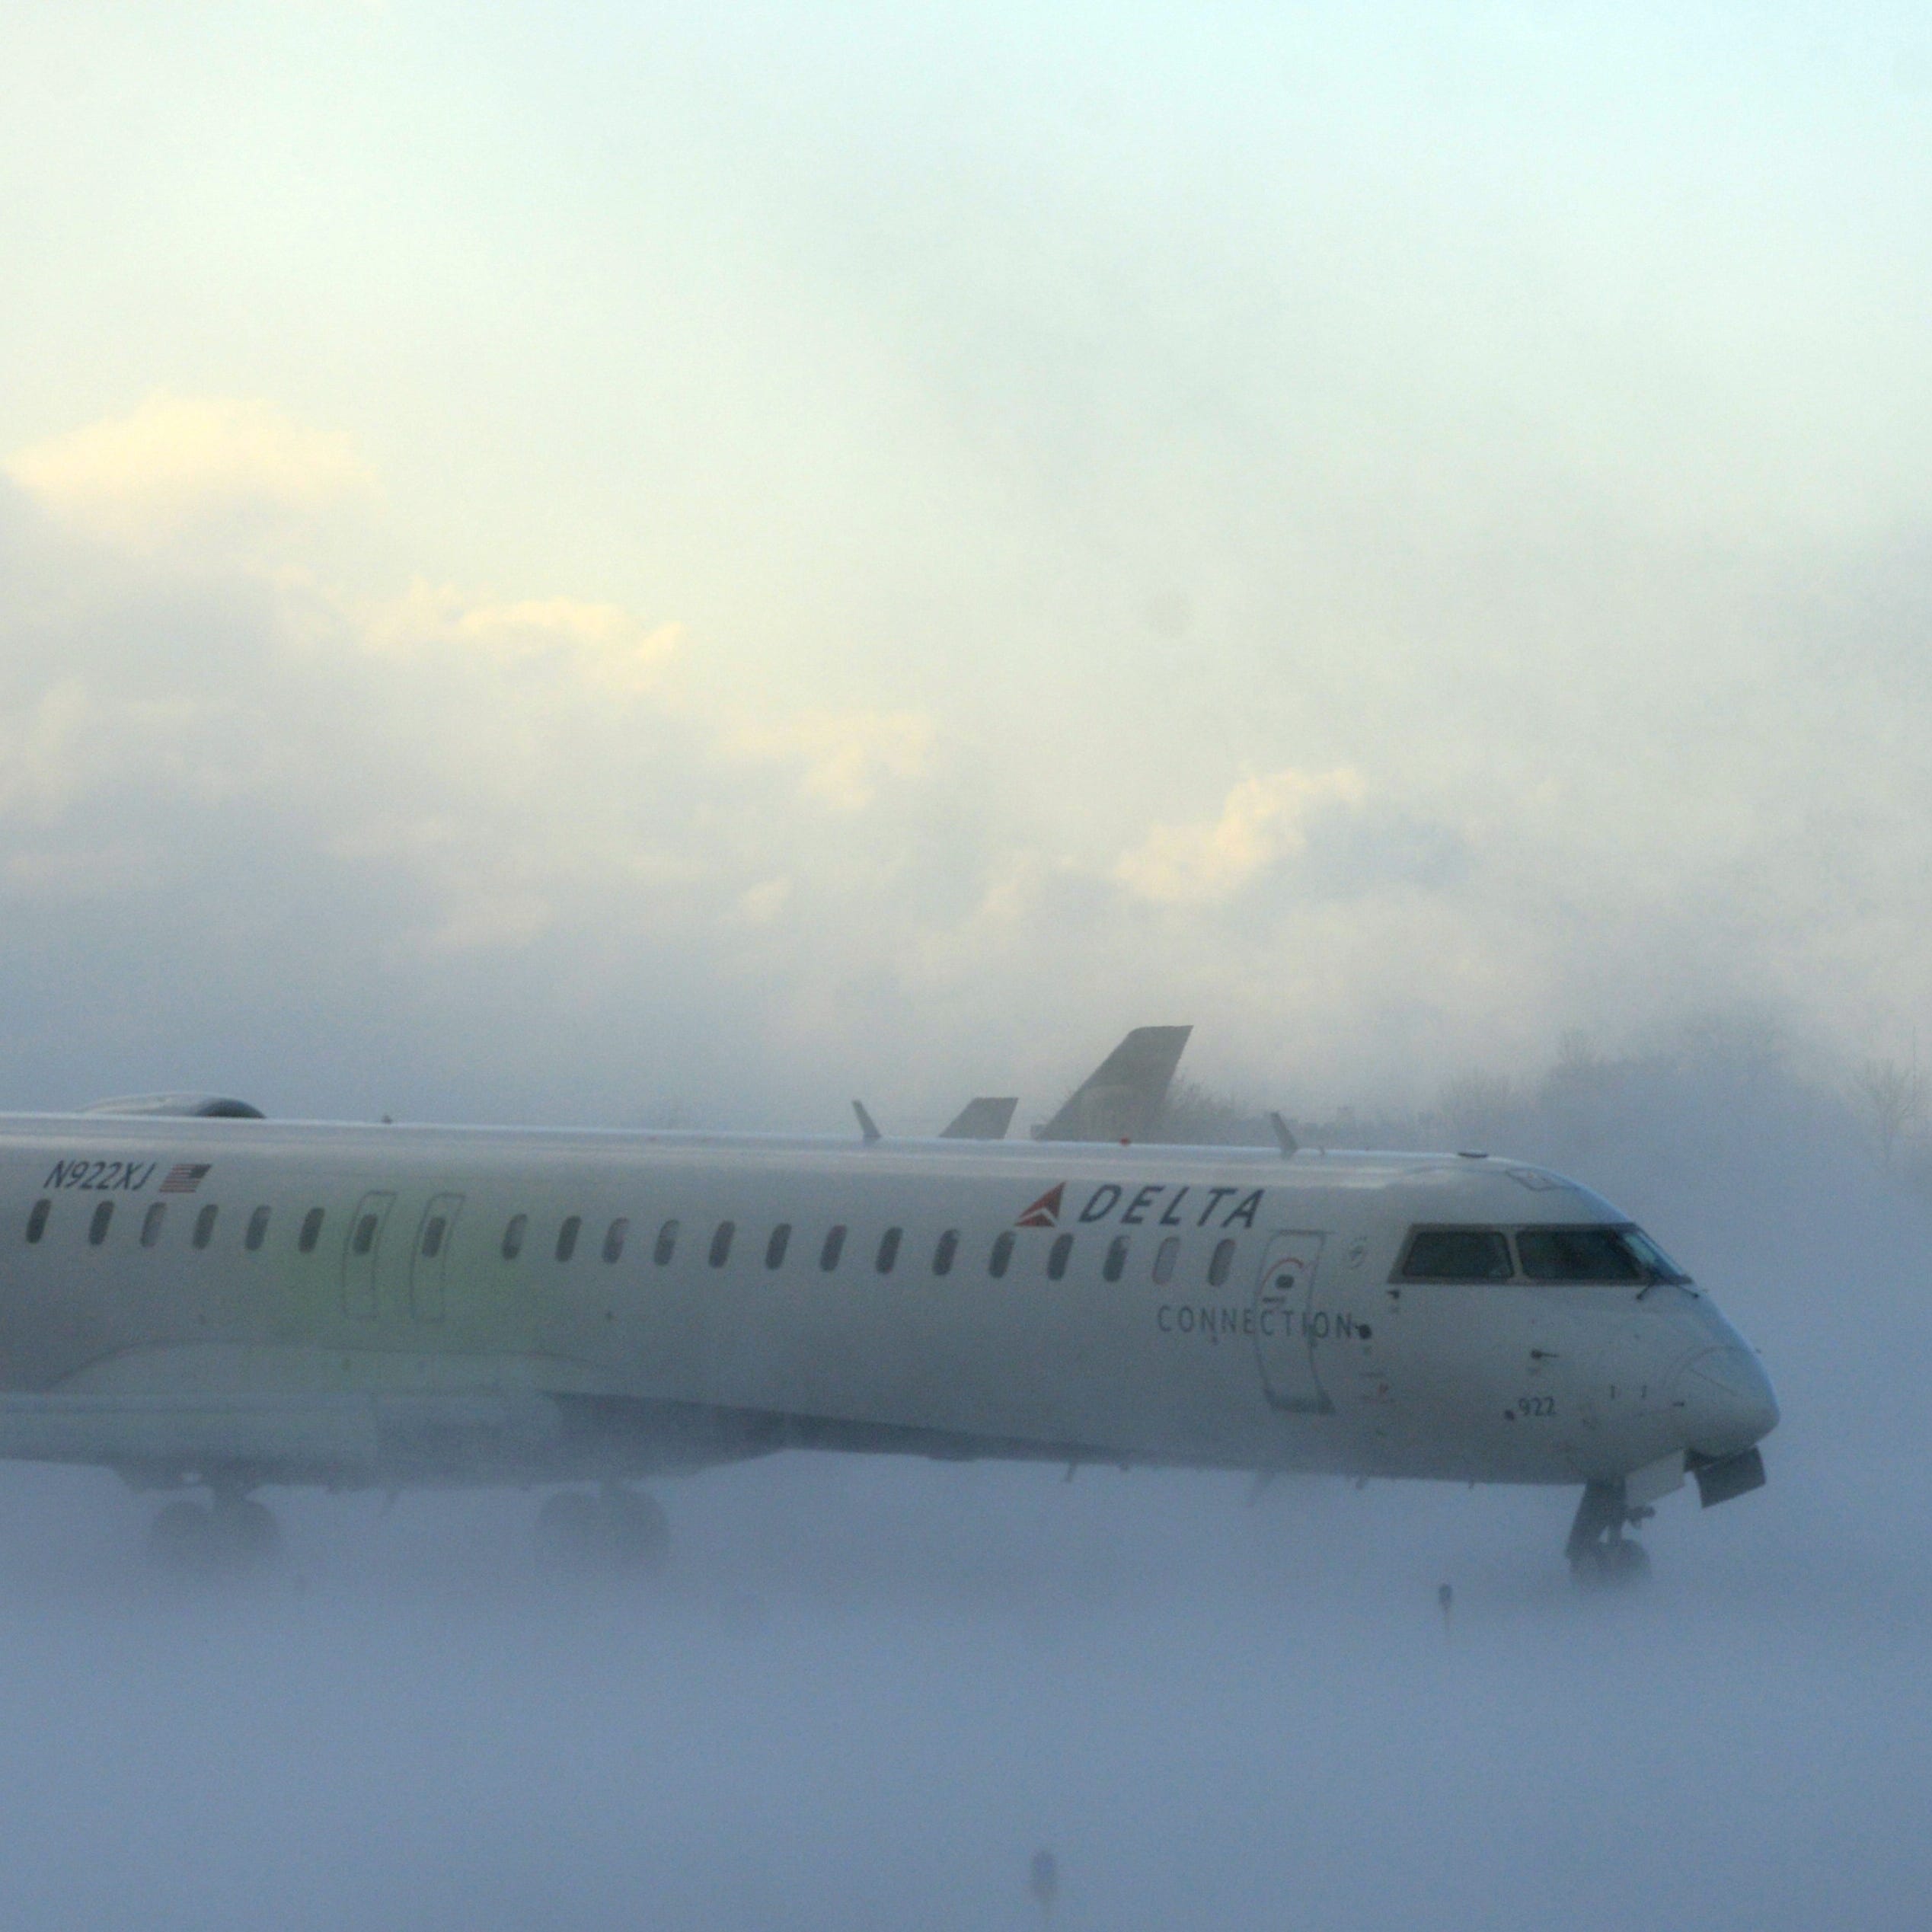 Lake-effect snow storm with freezing temperatures affected travel, like this plane that negotiated its way through the snow at Buffalo Greater International Airport, in Buffalo, N.Y. Tuesday, Nov. 18, 2014. Temperatures fell to freezing or below at r